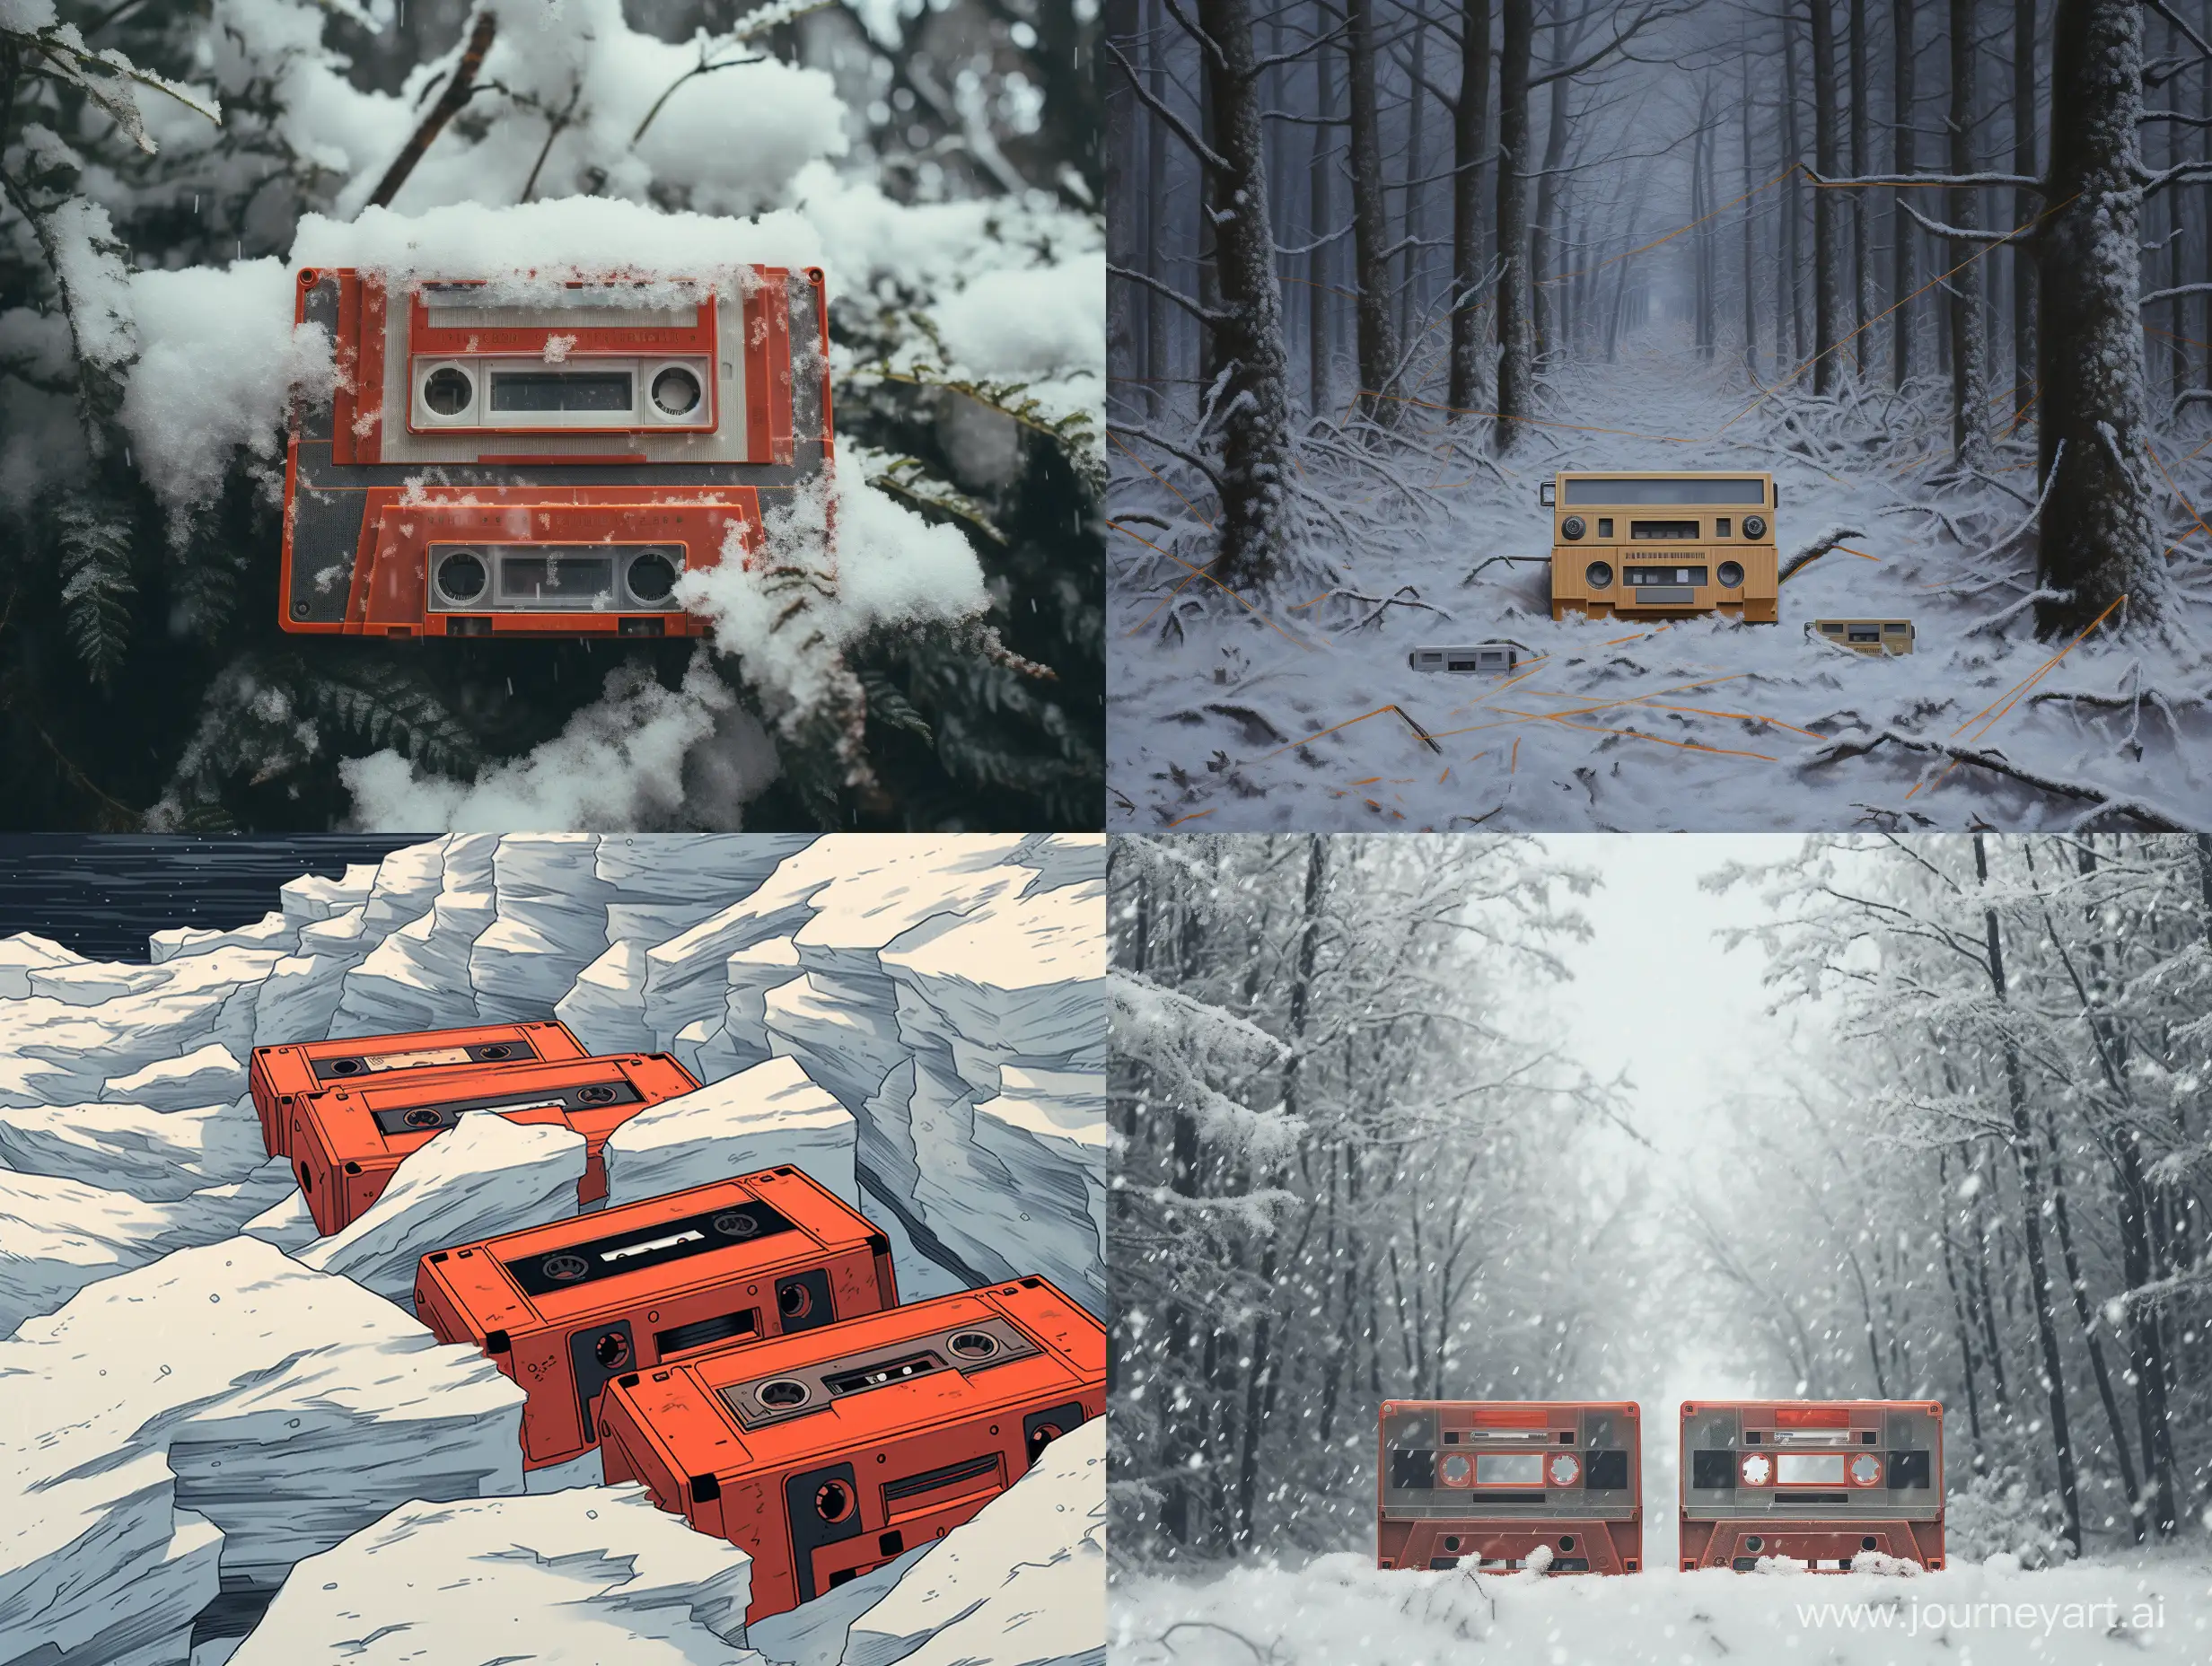 SnowCovered-Cassettes-in-43-Aspect-Ratio-Vintage-Nostalgia-and-Winter-Vibes